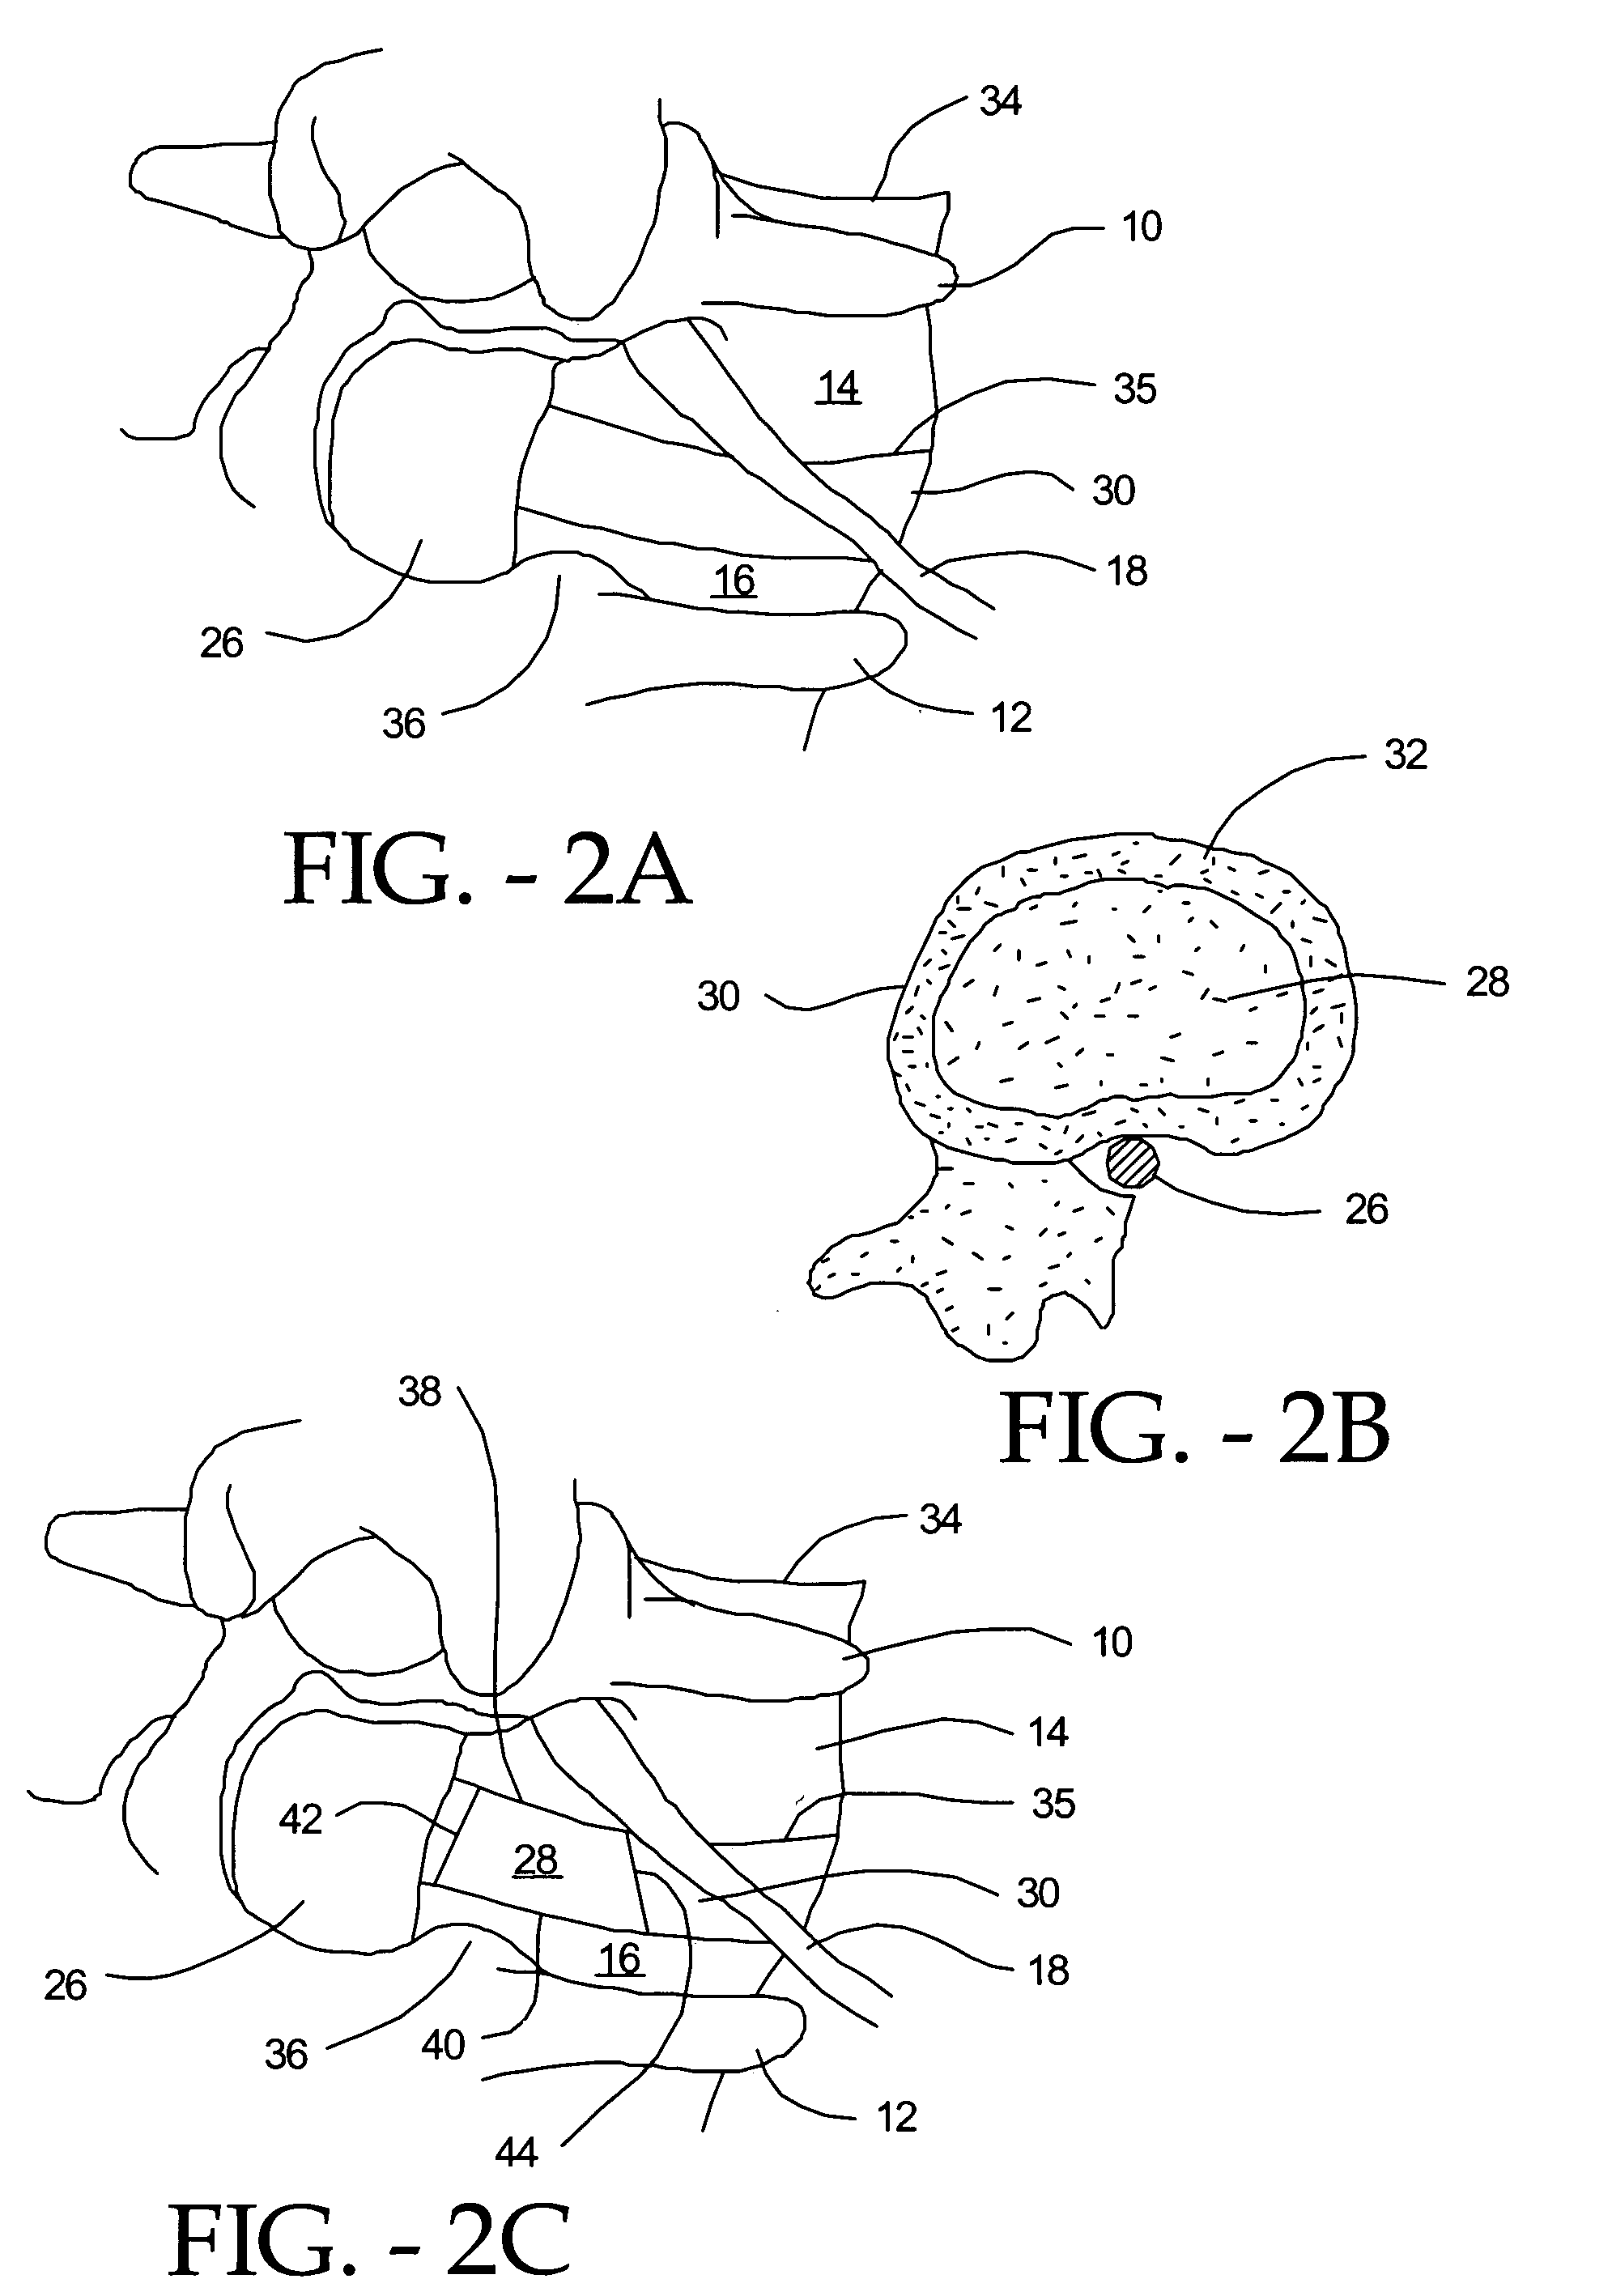 Multi-piece artificial spinal disk replacement device with multi-segmented support plates